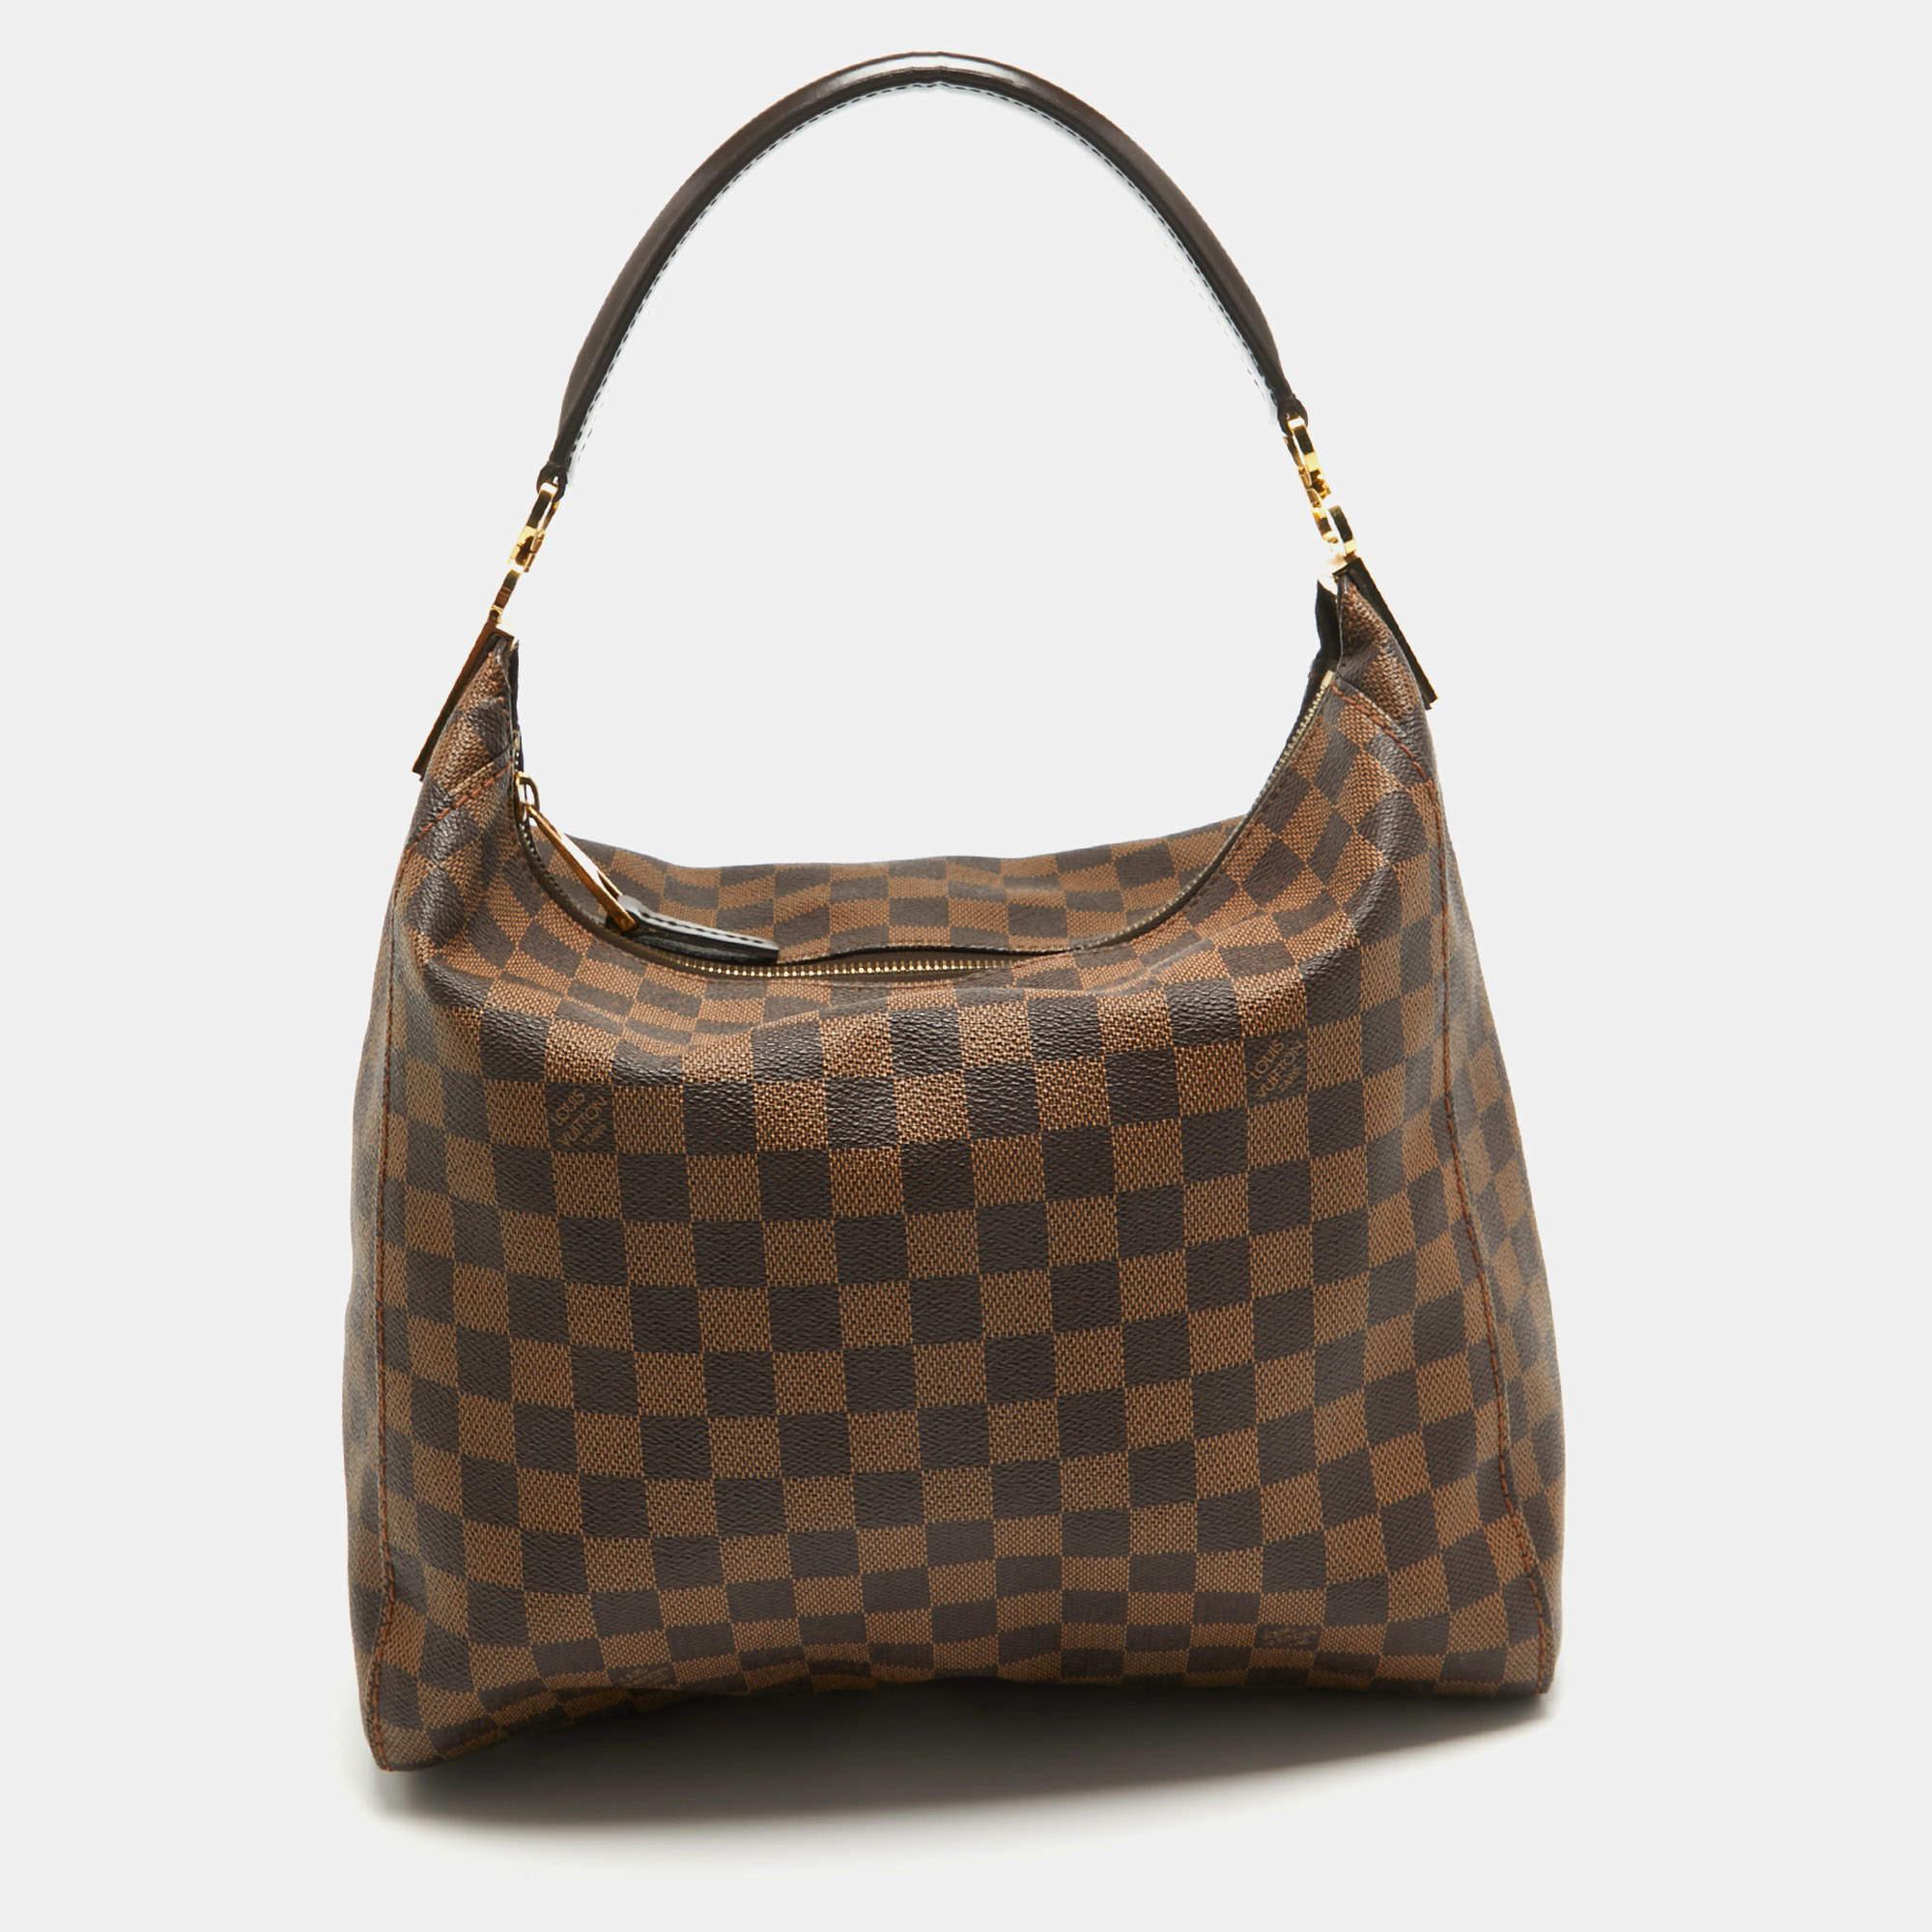 This stunning bag by Louis Vuitton is a must-have. Crafted from the brand's signature Damier Ebene canvas, it features a single handle, gold-tone hardware, and a zip closure that opens to a spacious lined interior. This Duomo bag is a versatile